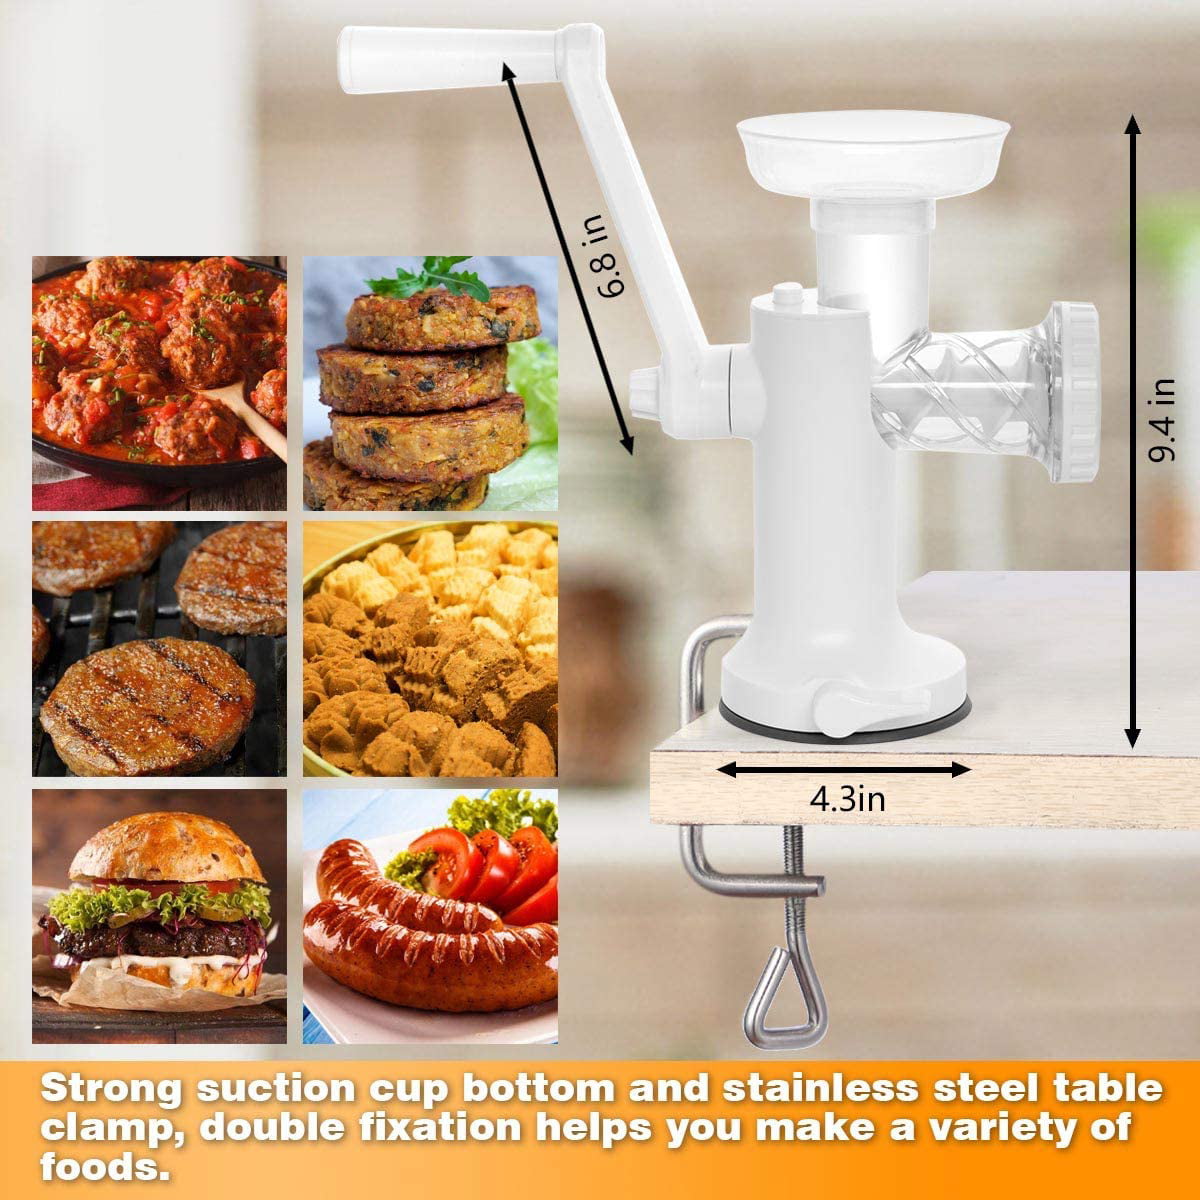 Cookies Churros 3-IN-1 Hand Meat Grinder Mincer Durable for Meat Rotary Grinder Sausage Stuffer Easy to Clean etc Sausage Manual Meat Grinder 